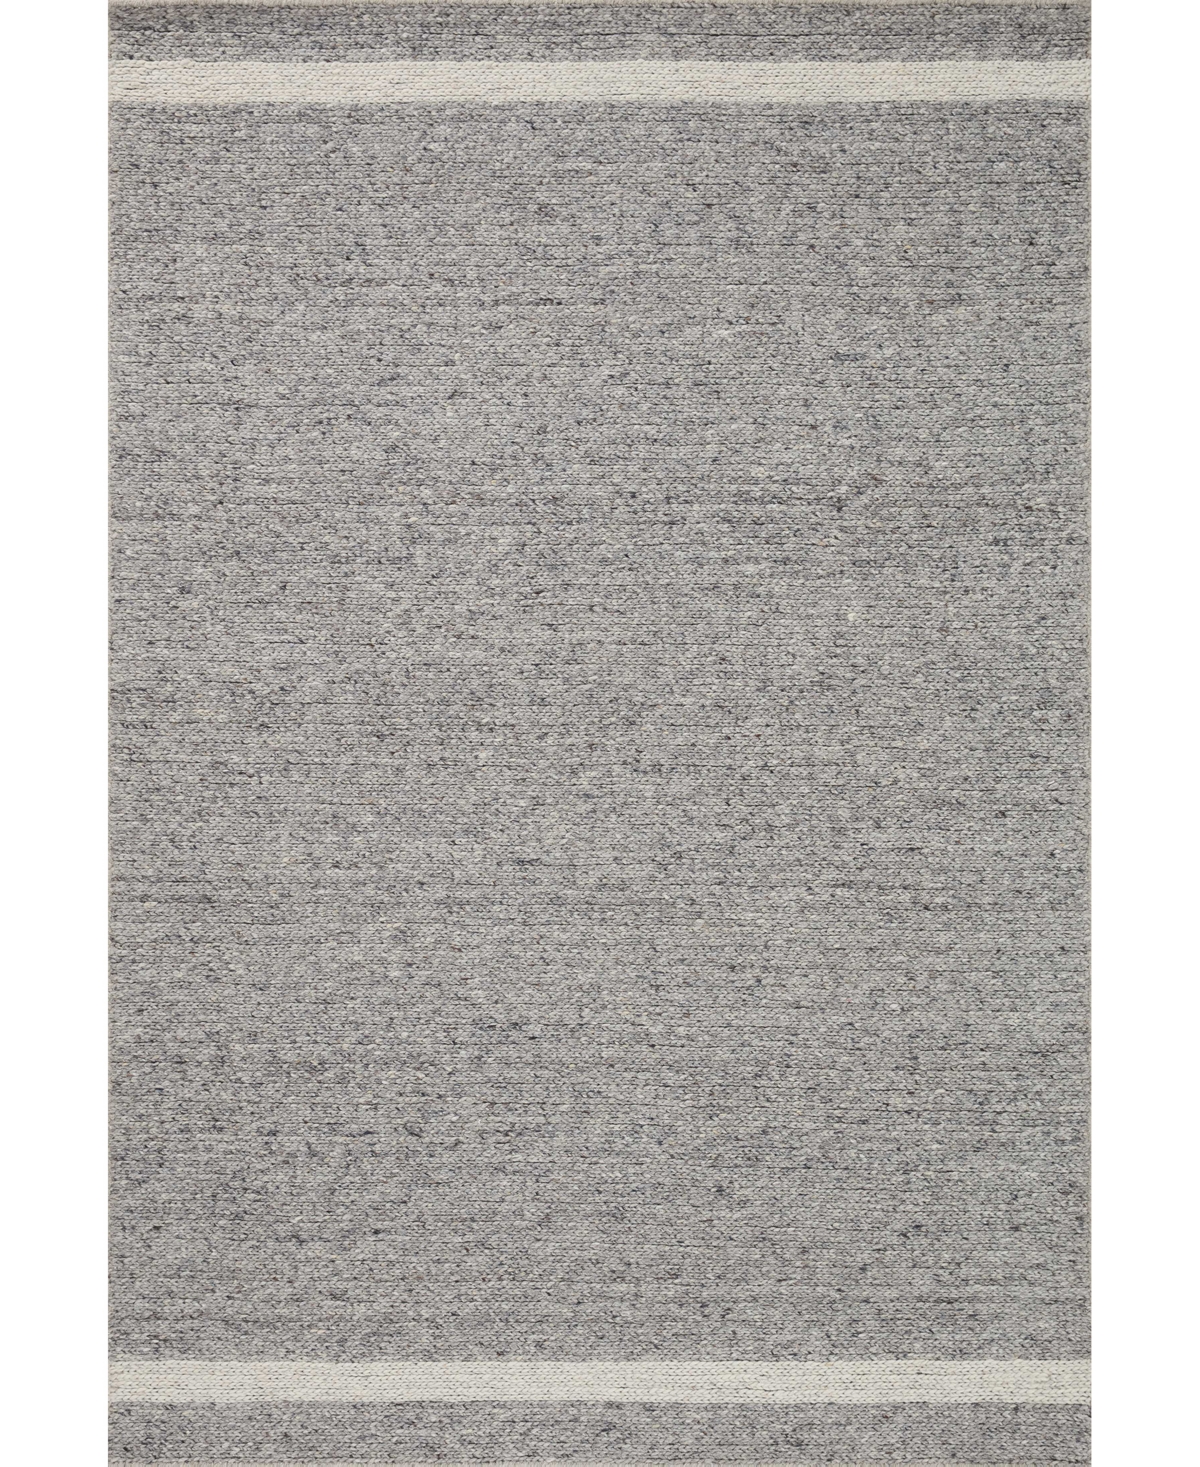 Magnolia Home By Joanna Gaines X Loloi Ashby Ash-04 5' X 7'6" Area Rug In Slate